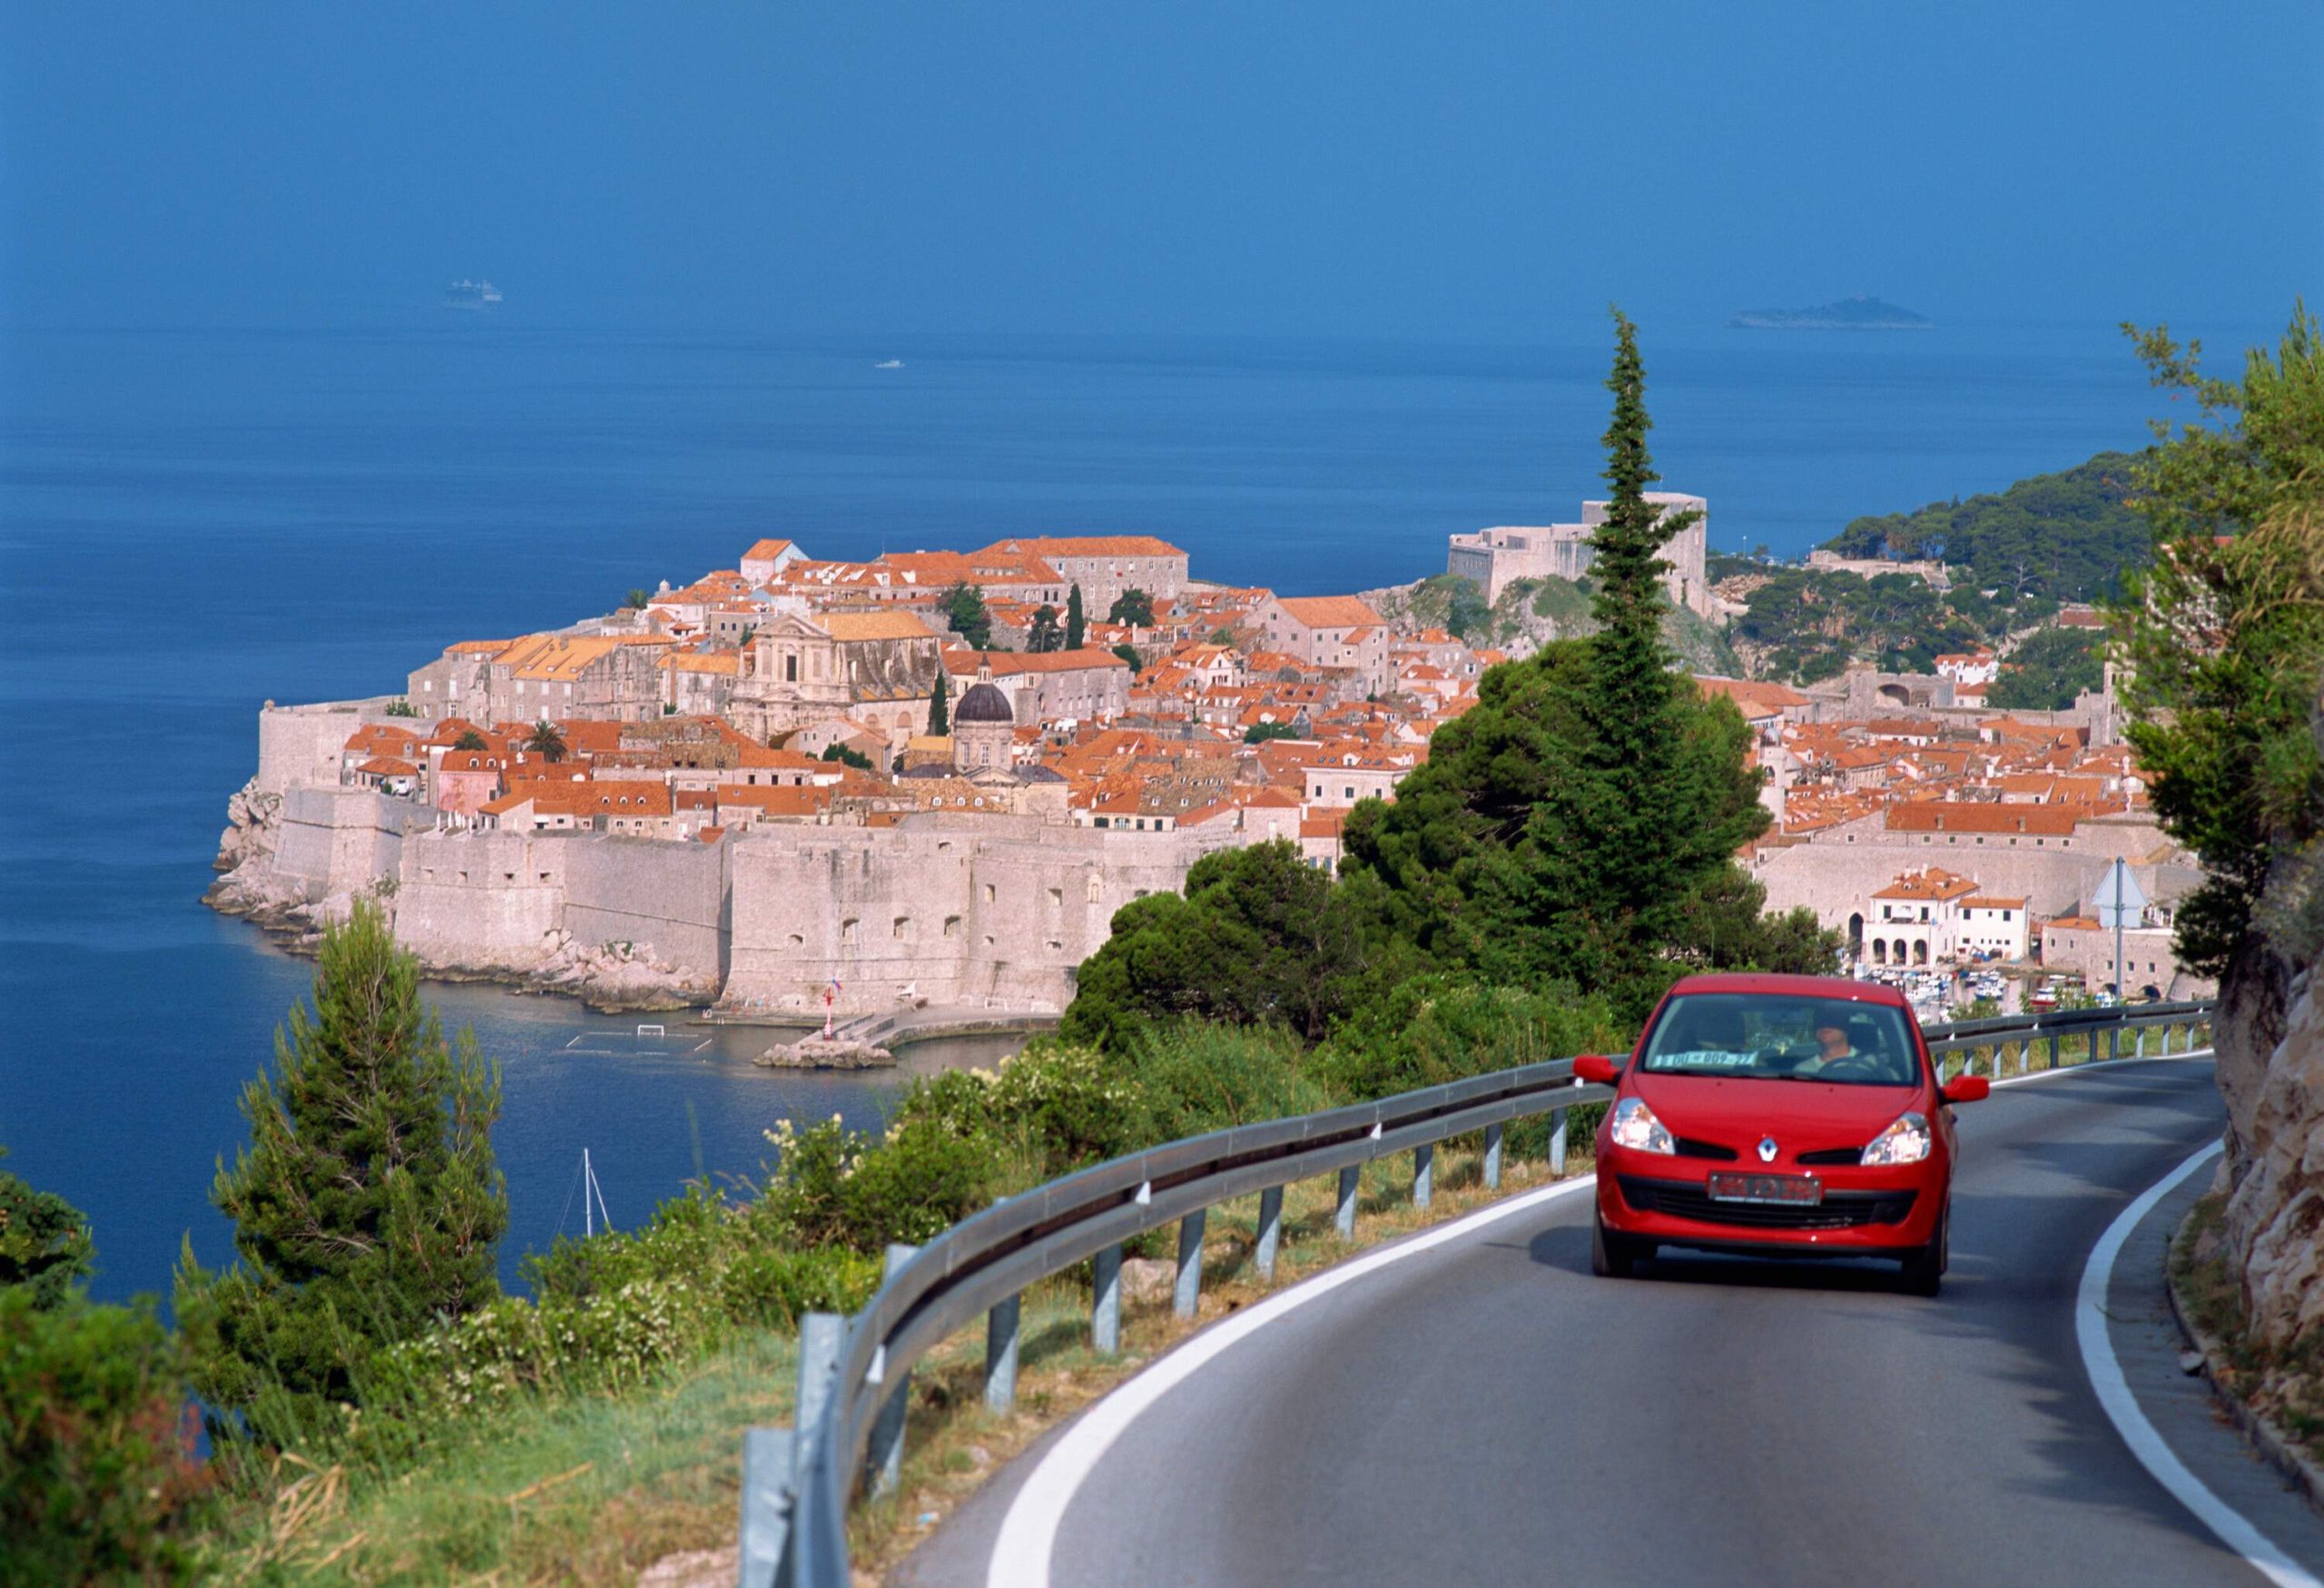 A vibrant red car traverses a winding road atop a hill, offering breathtaking views of a walled coastal city below.